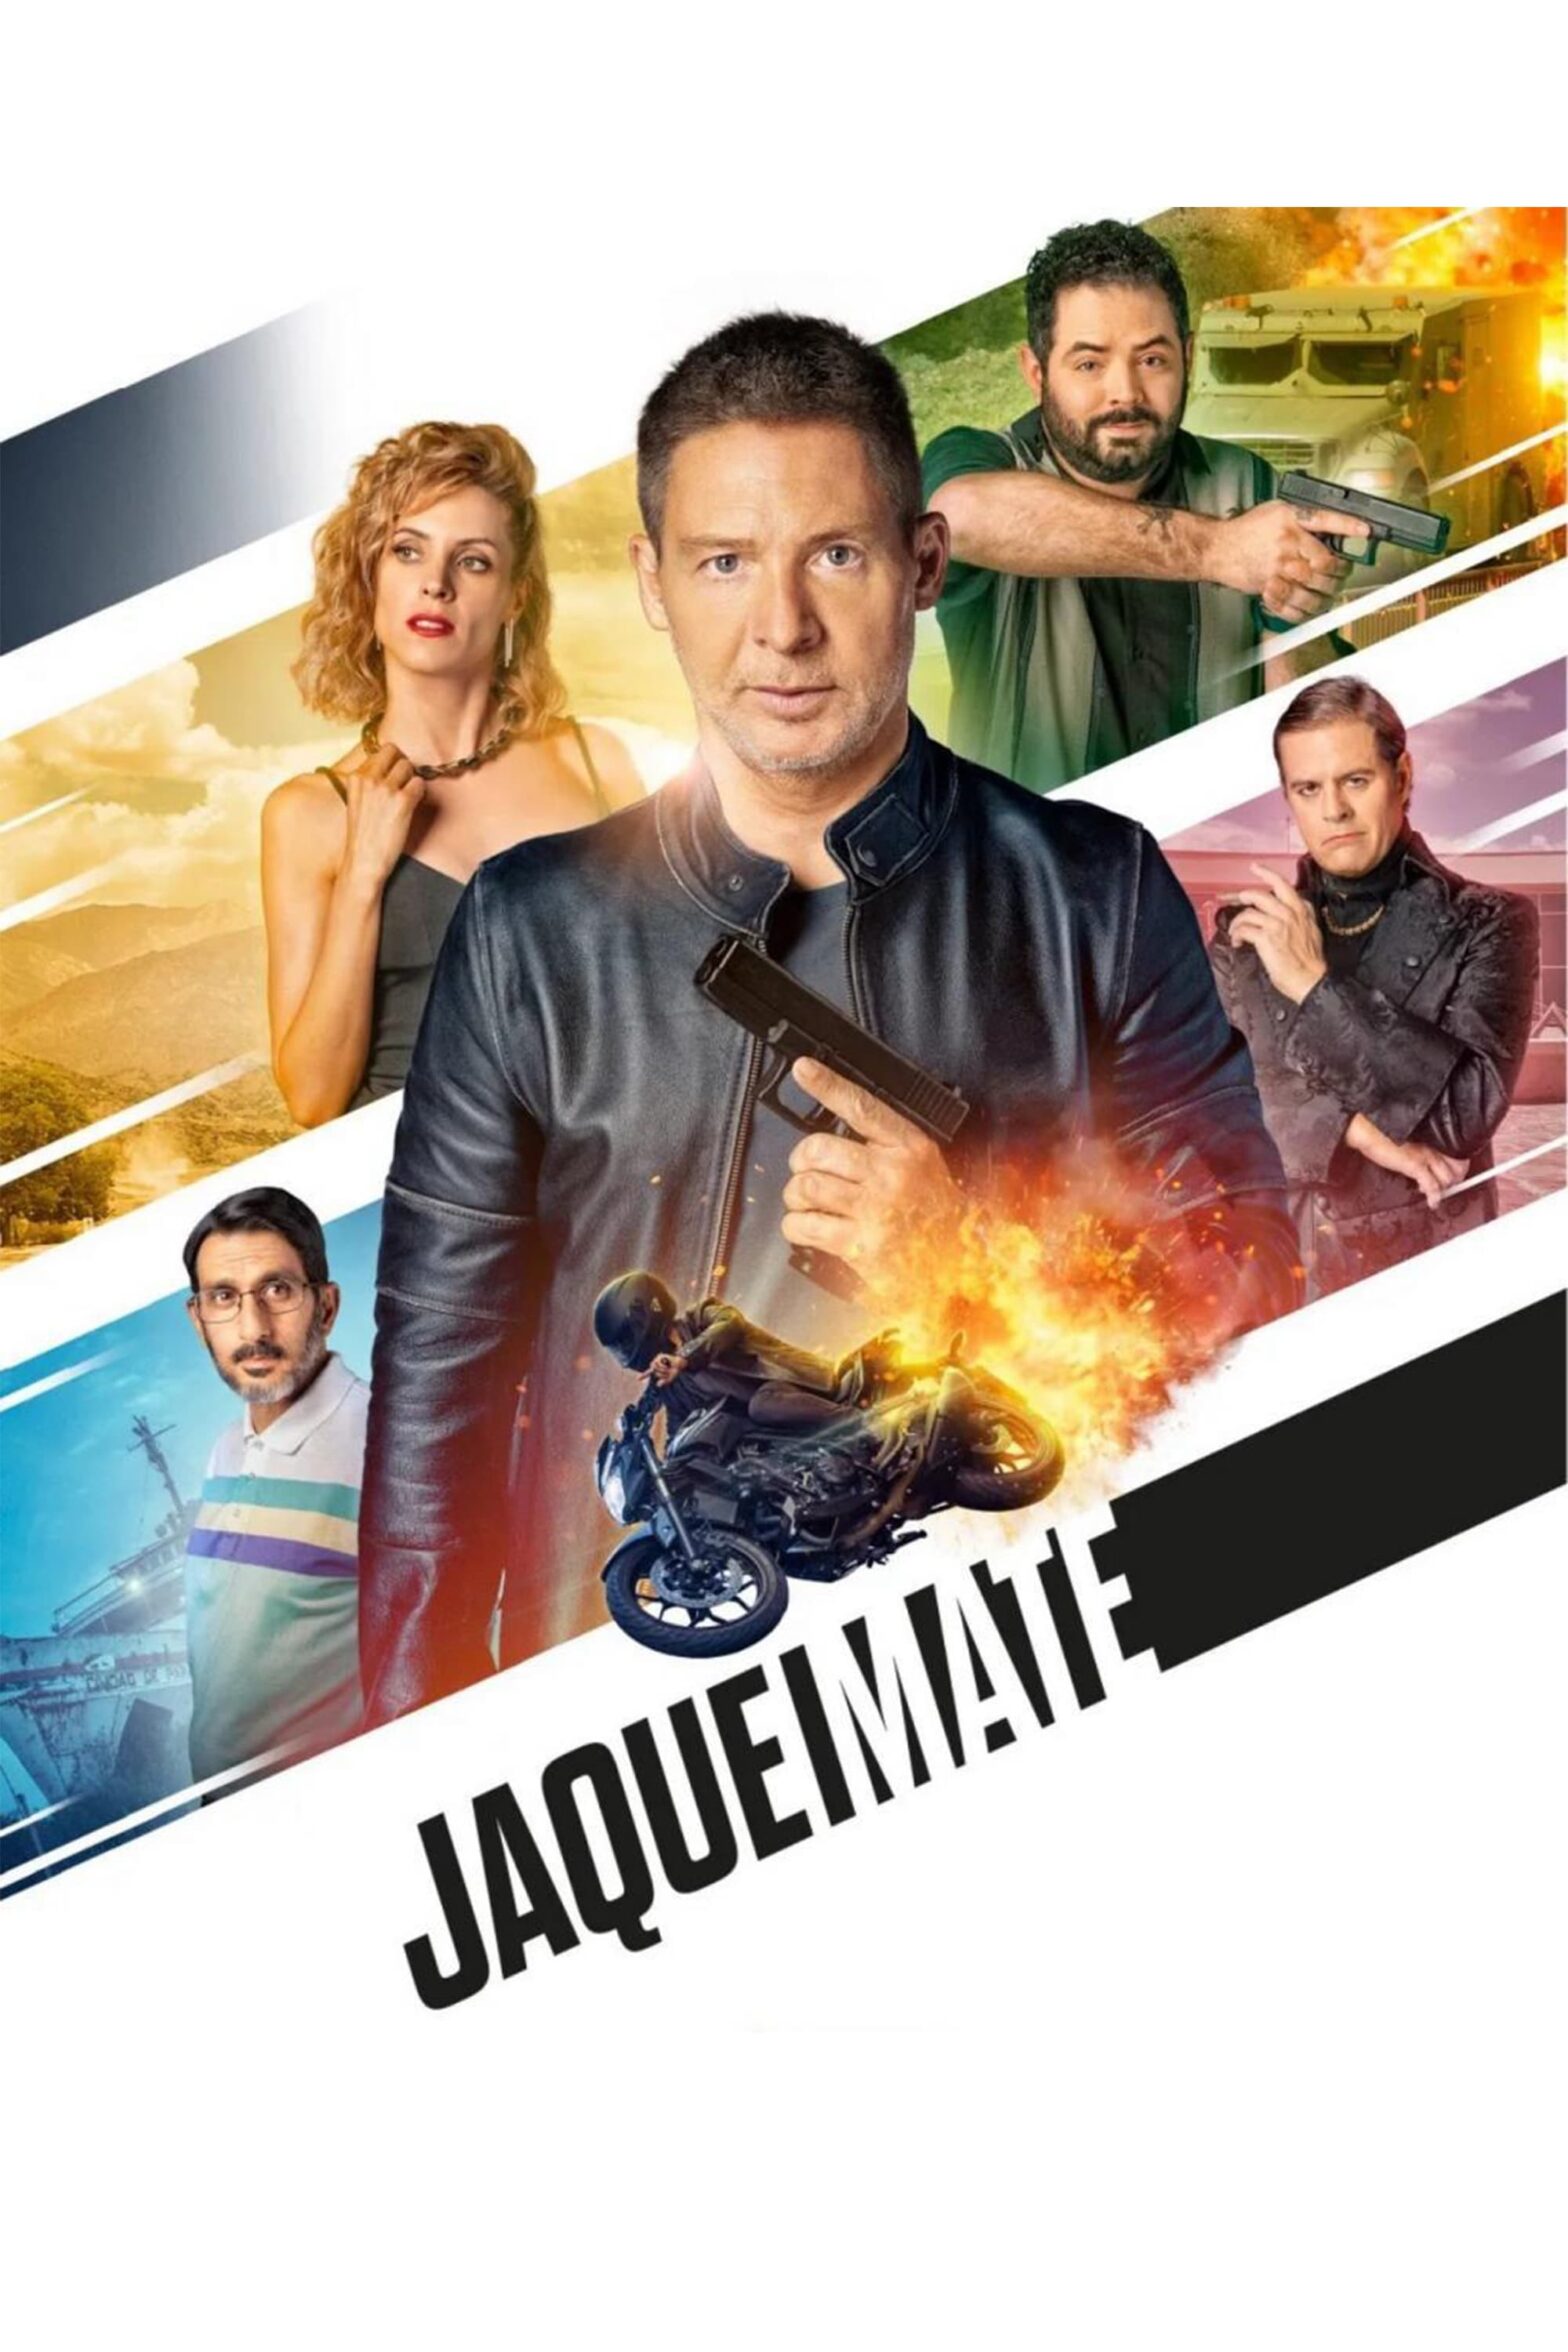 Poster for the movie "Jaque Mate"